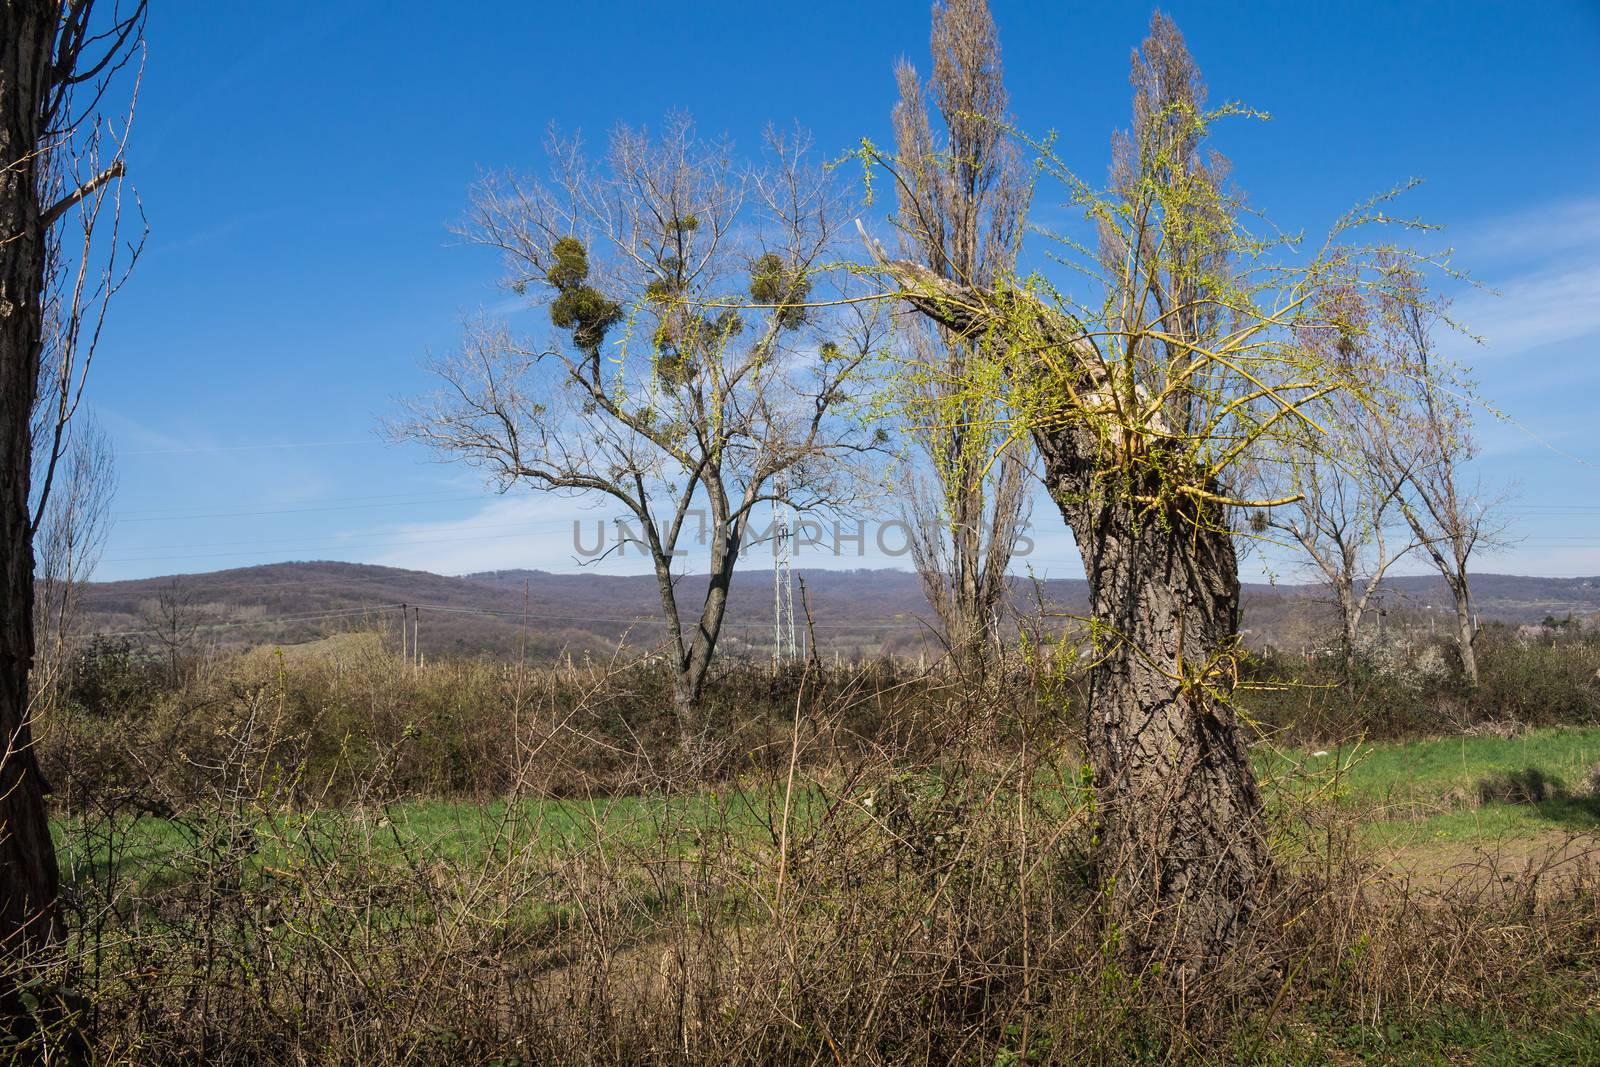 Trunk of a broken old tree, with a new branches in the early spring. Line of the mountains Karpaty on the horizon.